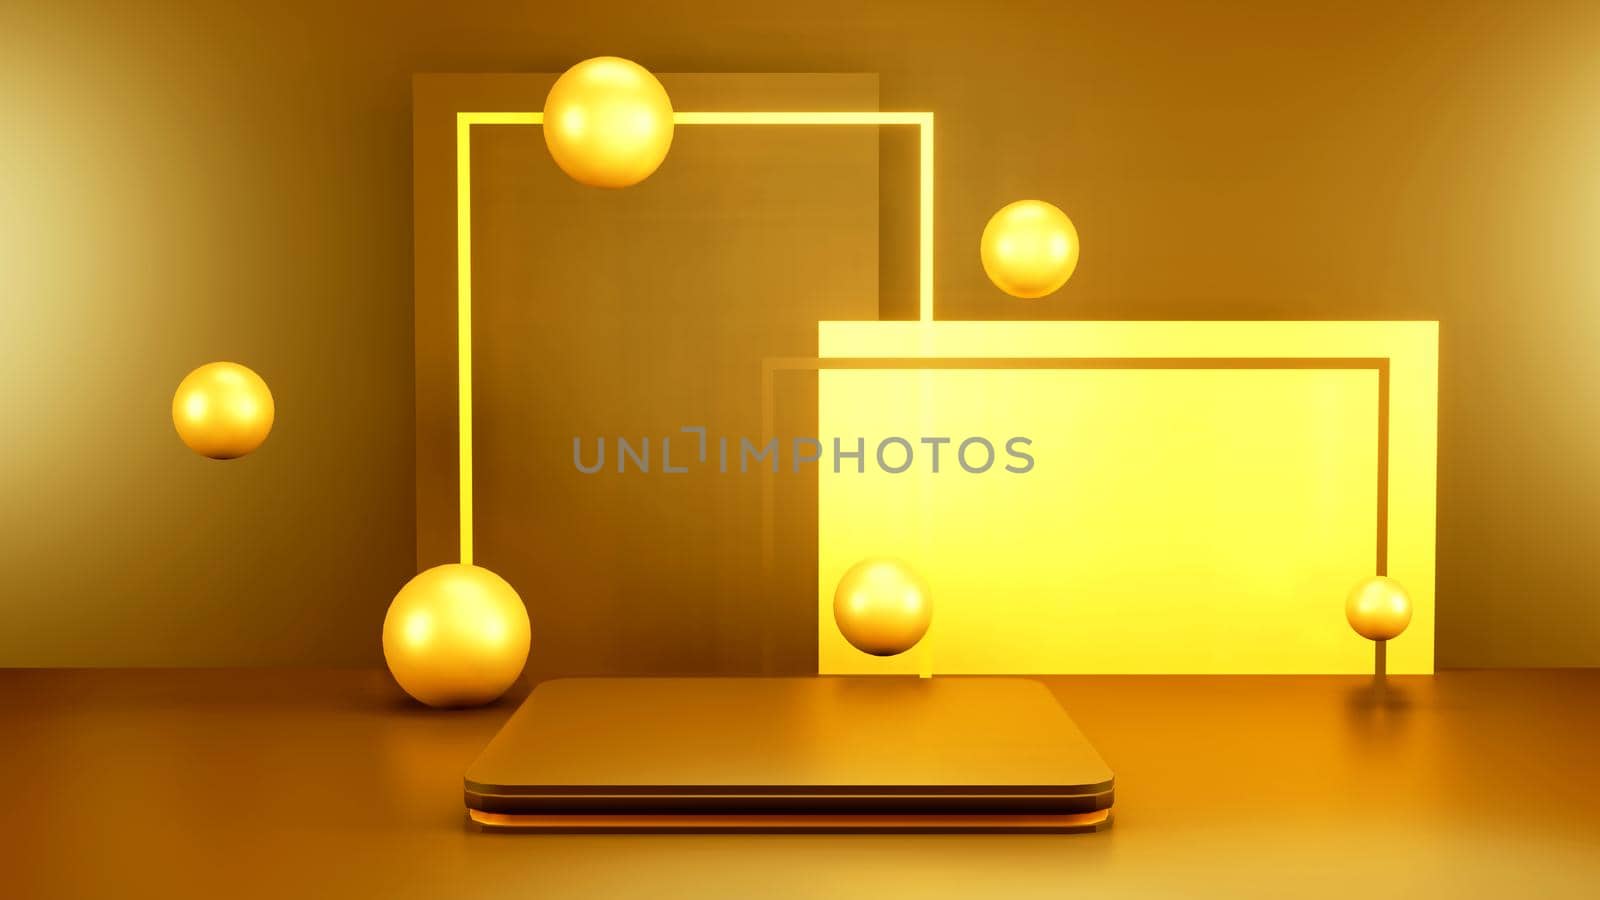 Abstract 3D podium with lighting gold color on a yellow background. Podium stage for an award ceremony or performance by an artist. Stock 3D redering illustration